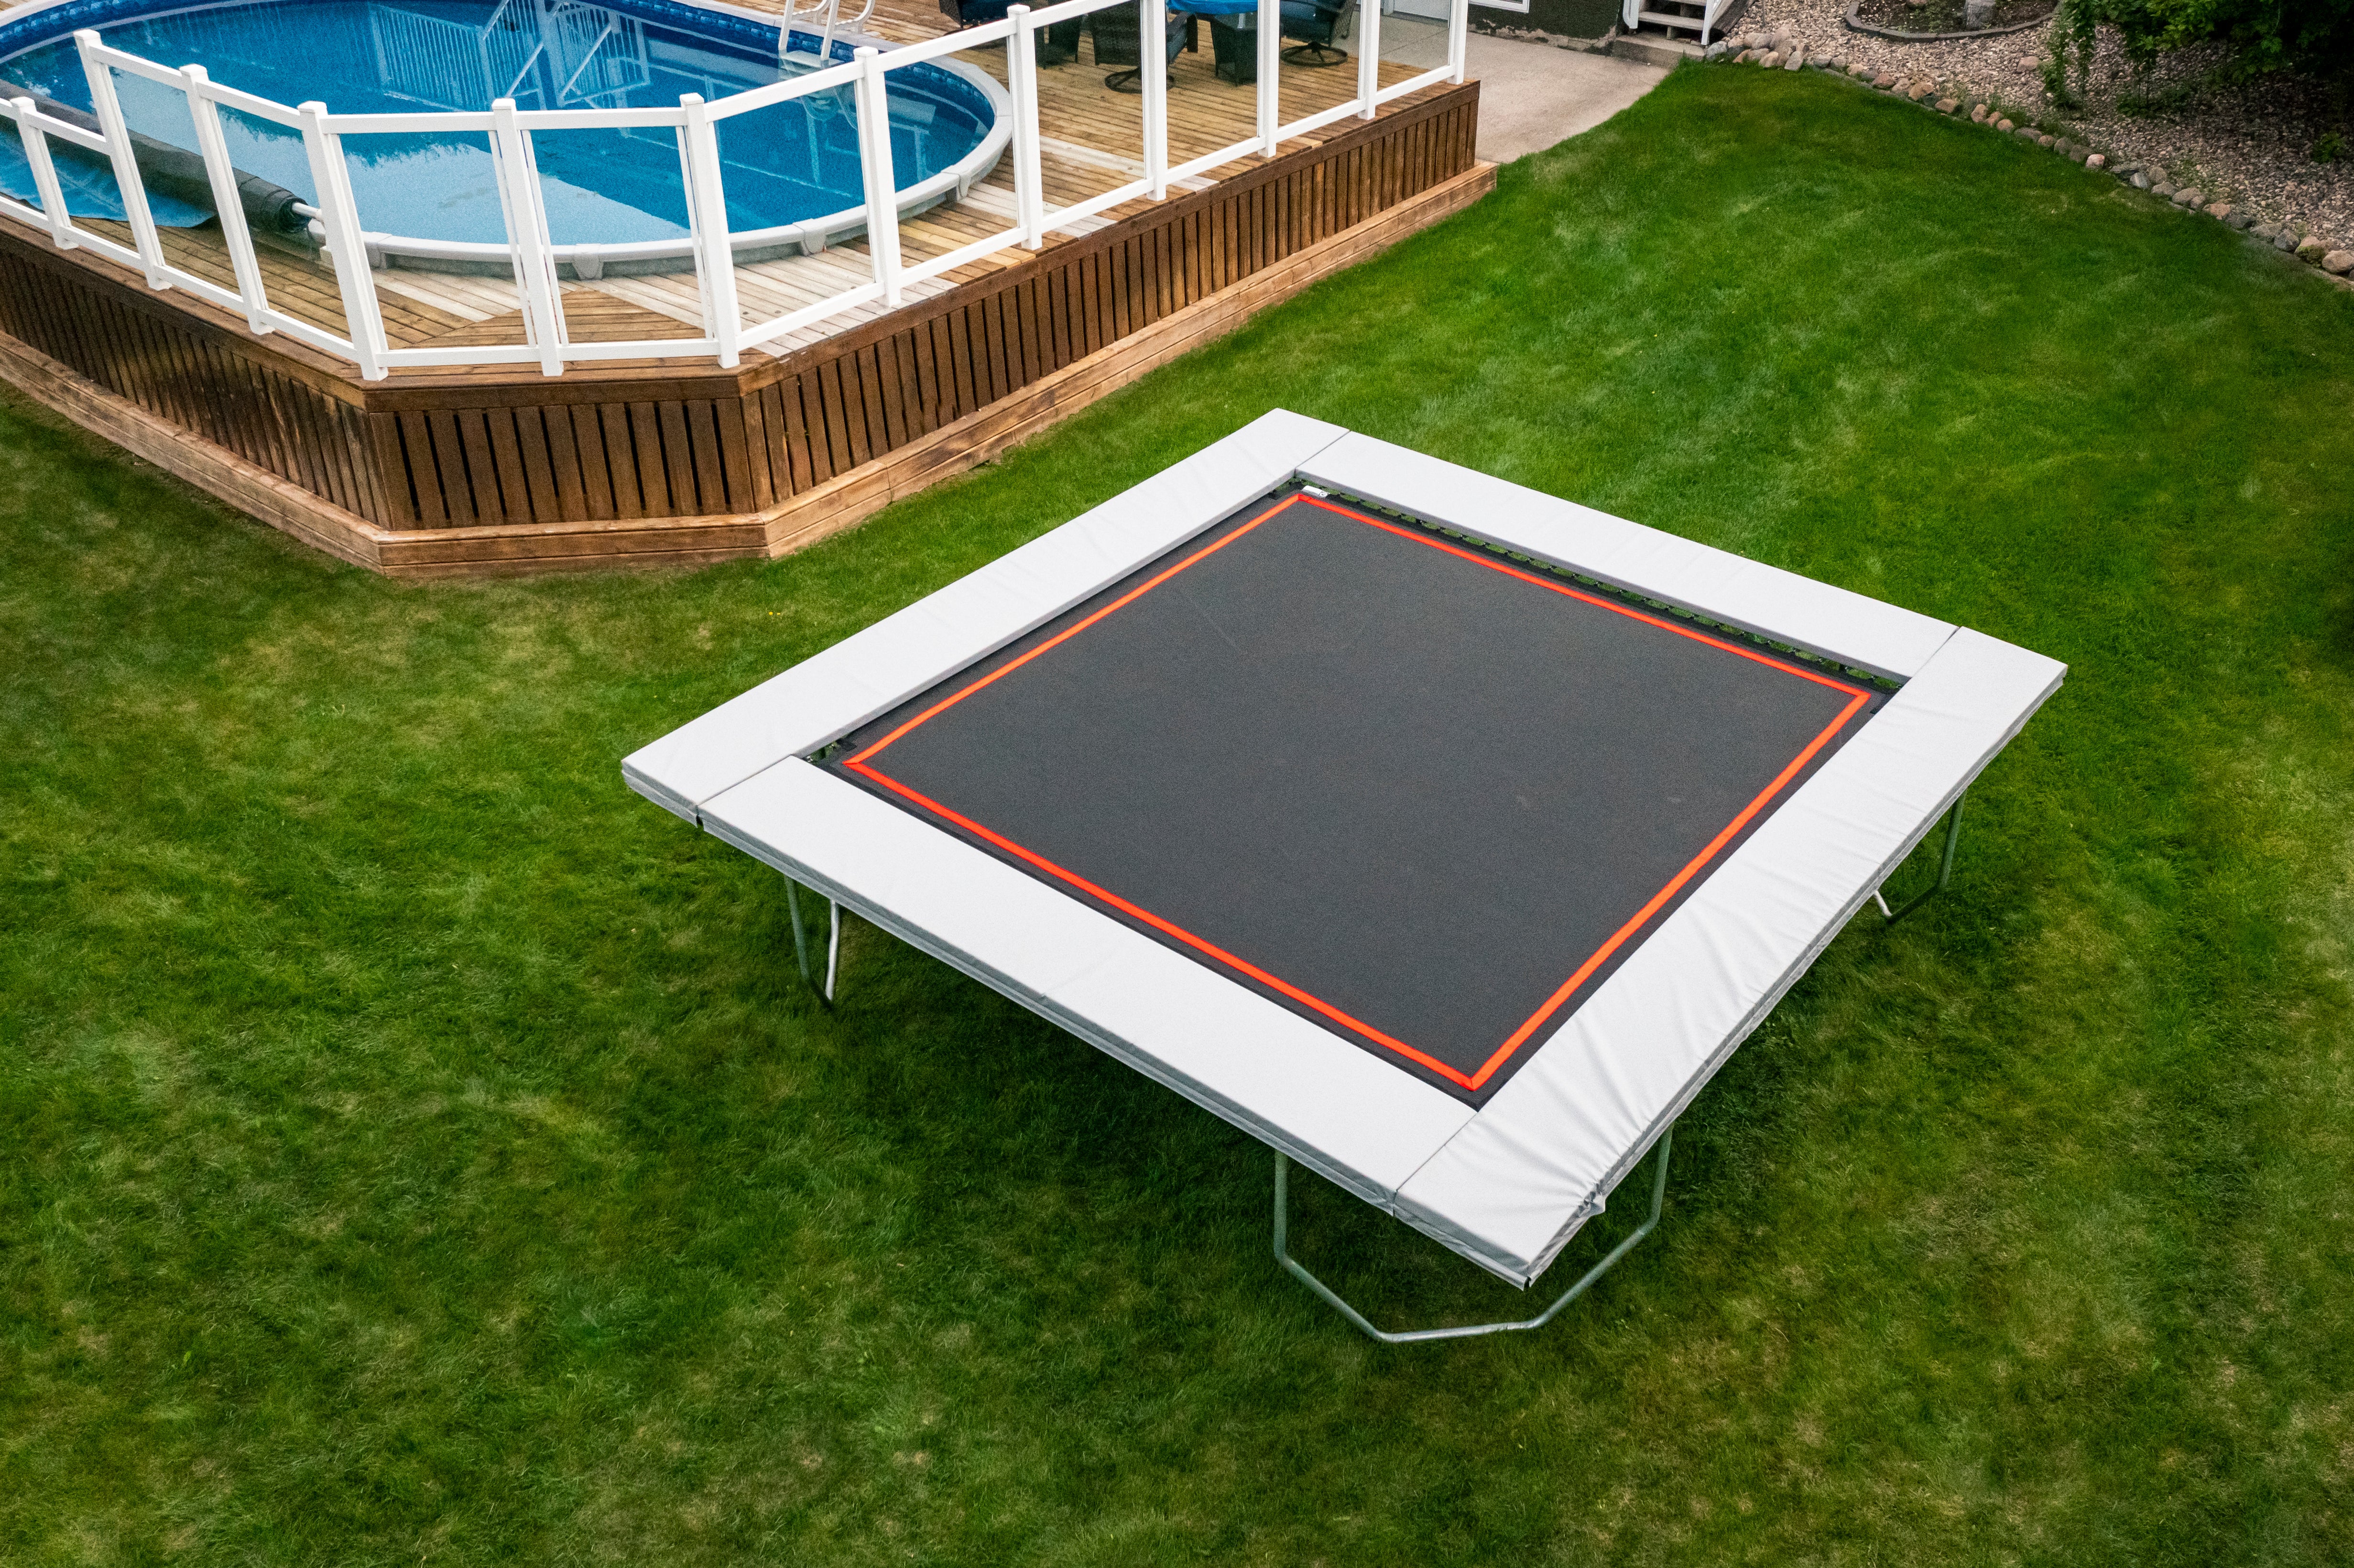 Training on a Square Trampoline